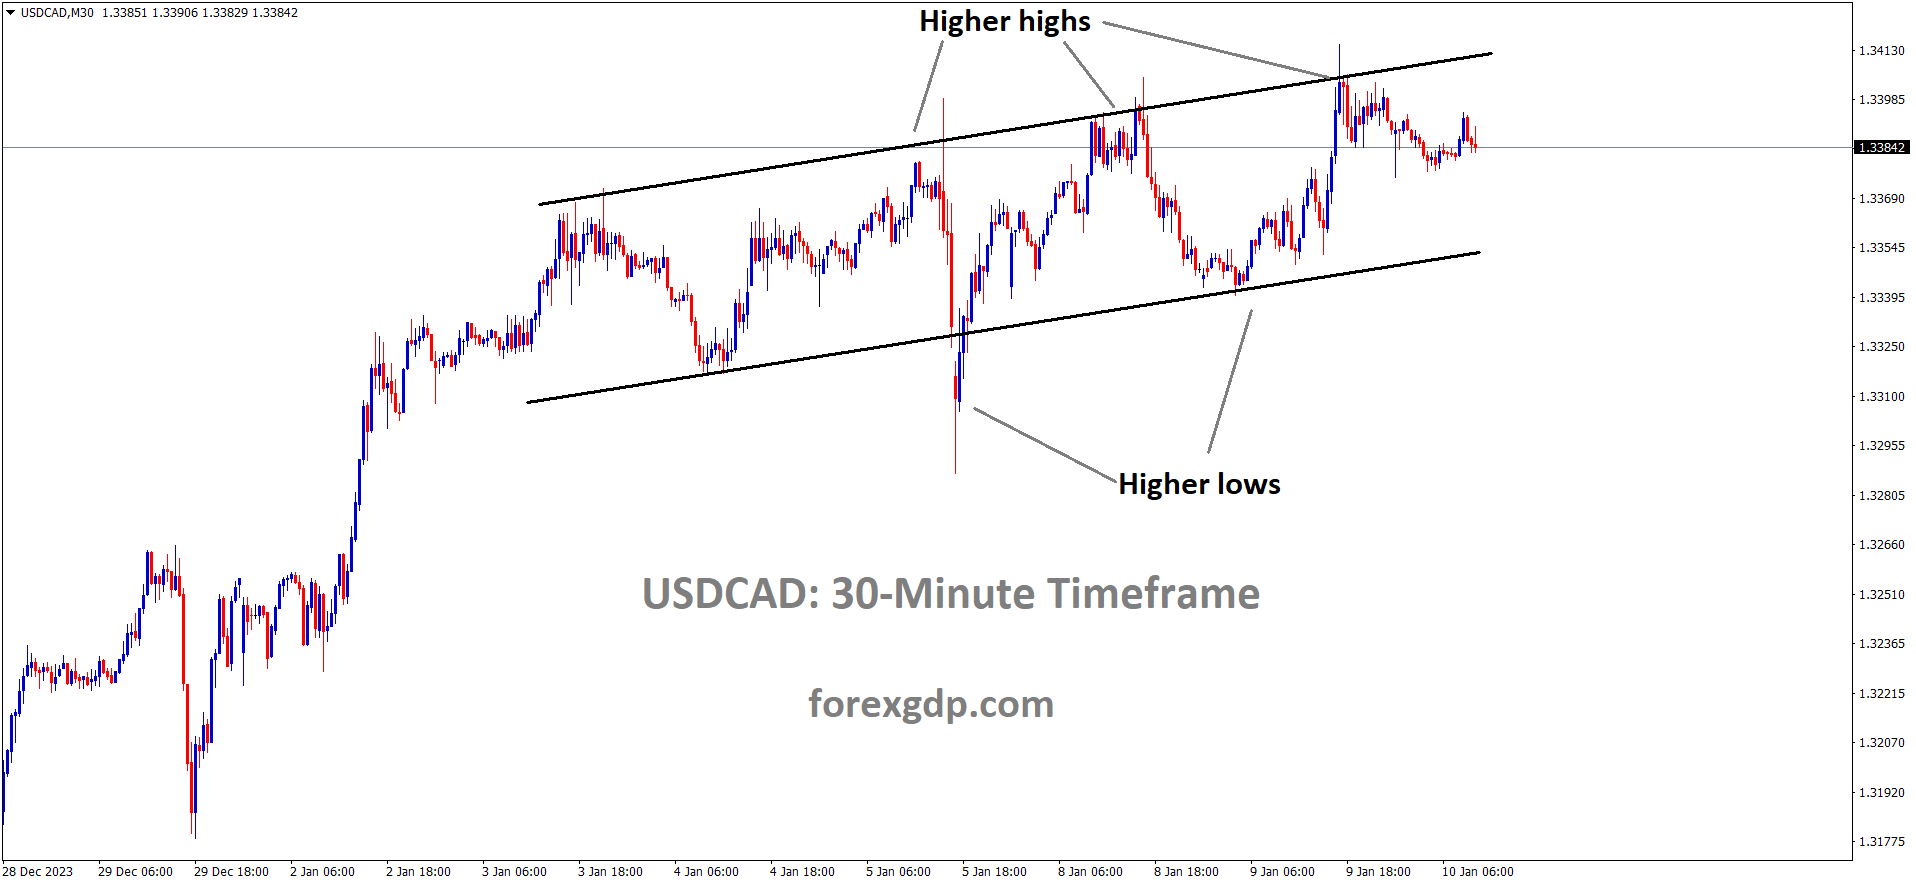 USDCAD is moving in an Ascending channel and the market has fallen from the higher high area of the channel